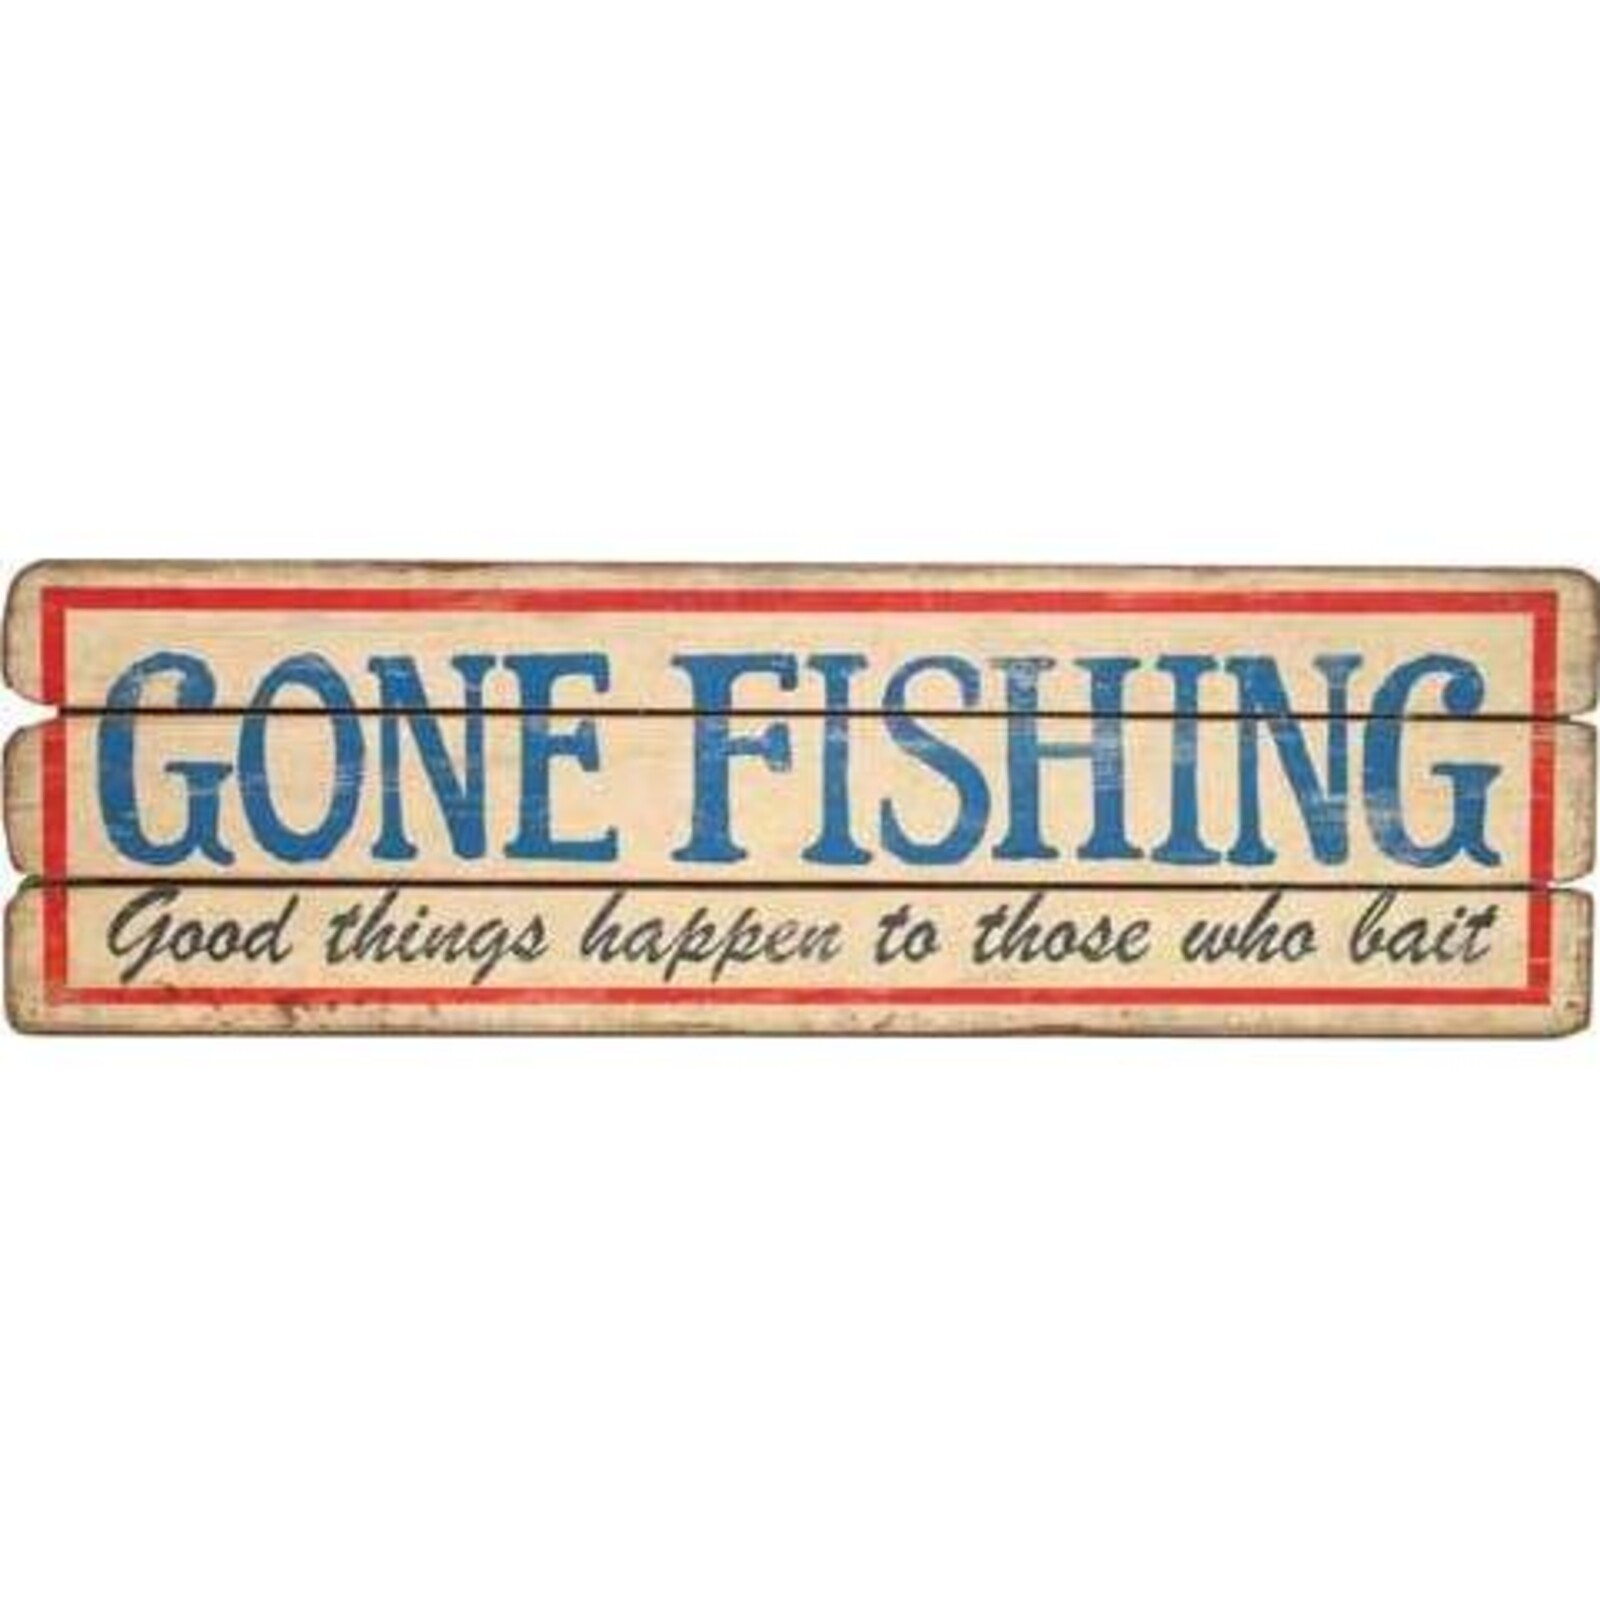 Sign - Gone Fishing